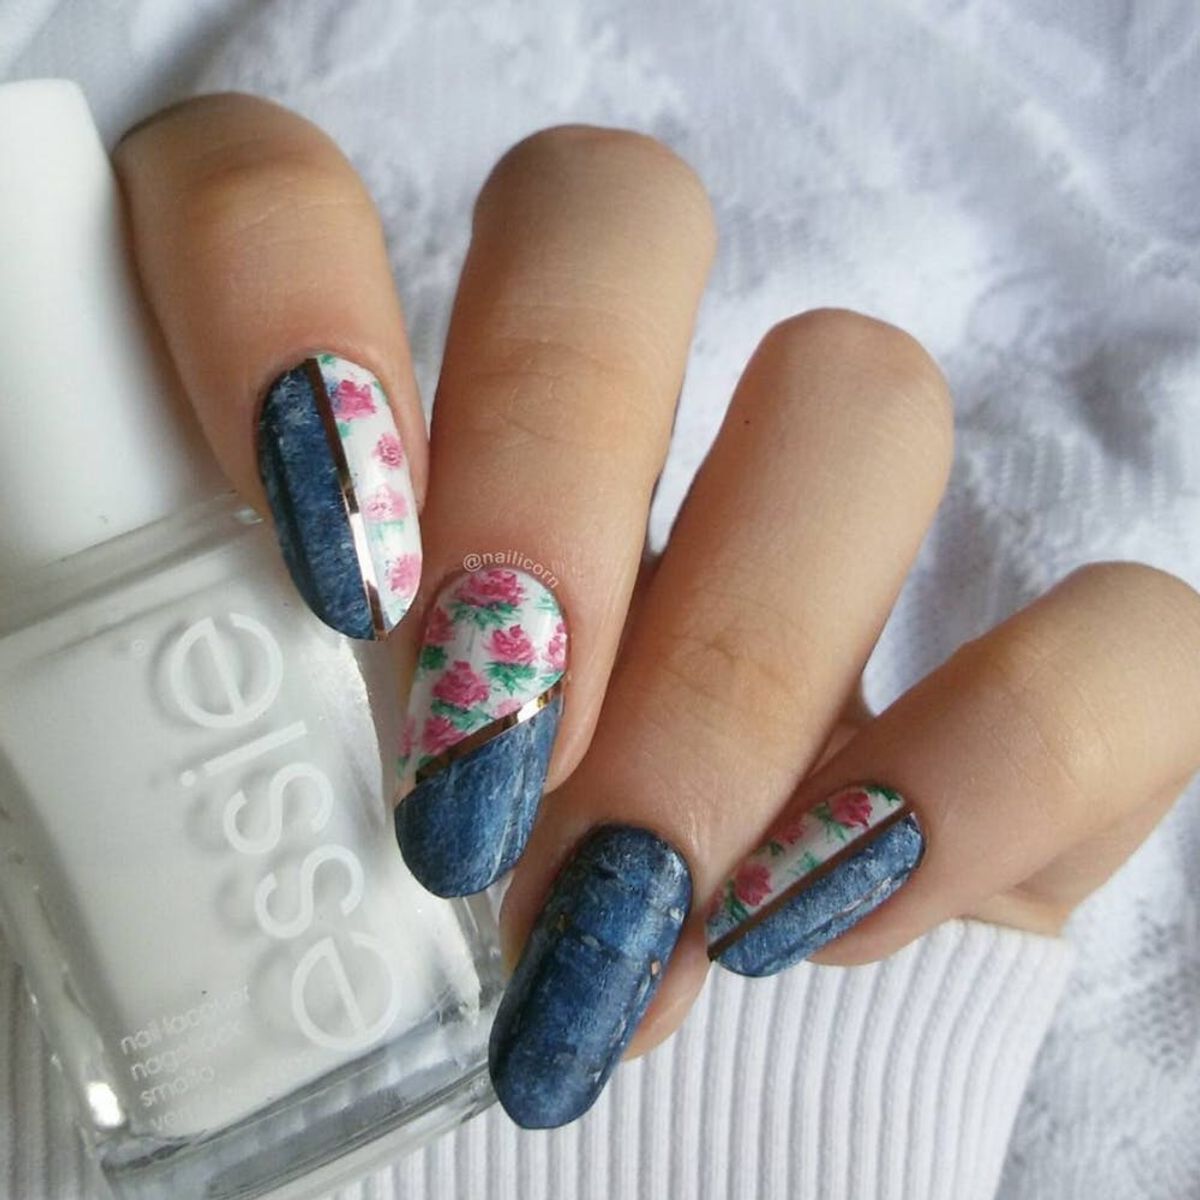 Denim Nails Are the Latest Mani Trend Blowing Up Your Instagram Feed